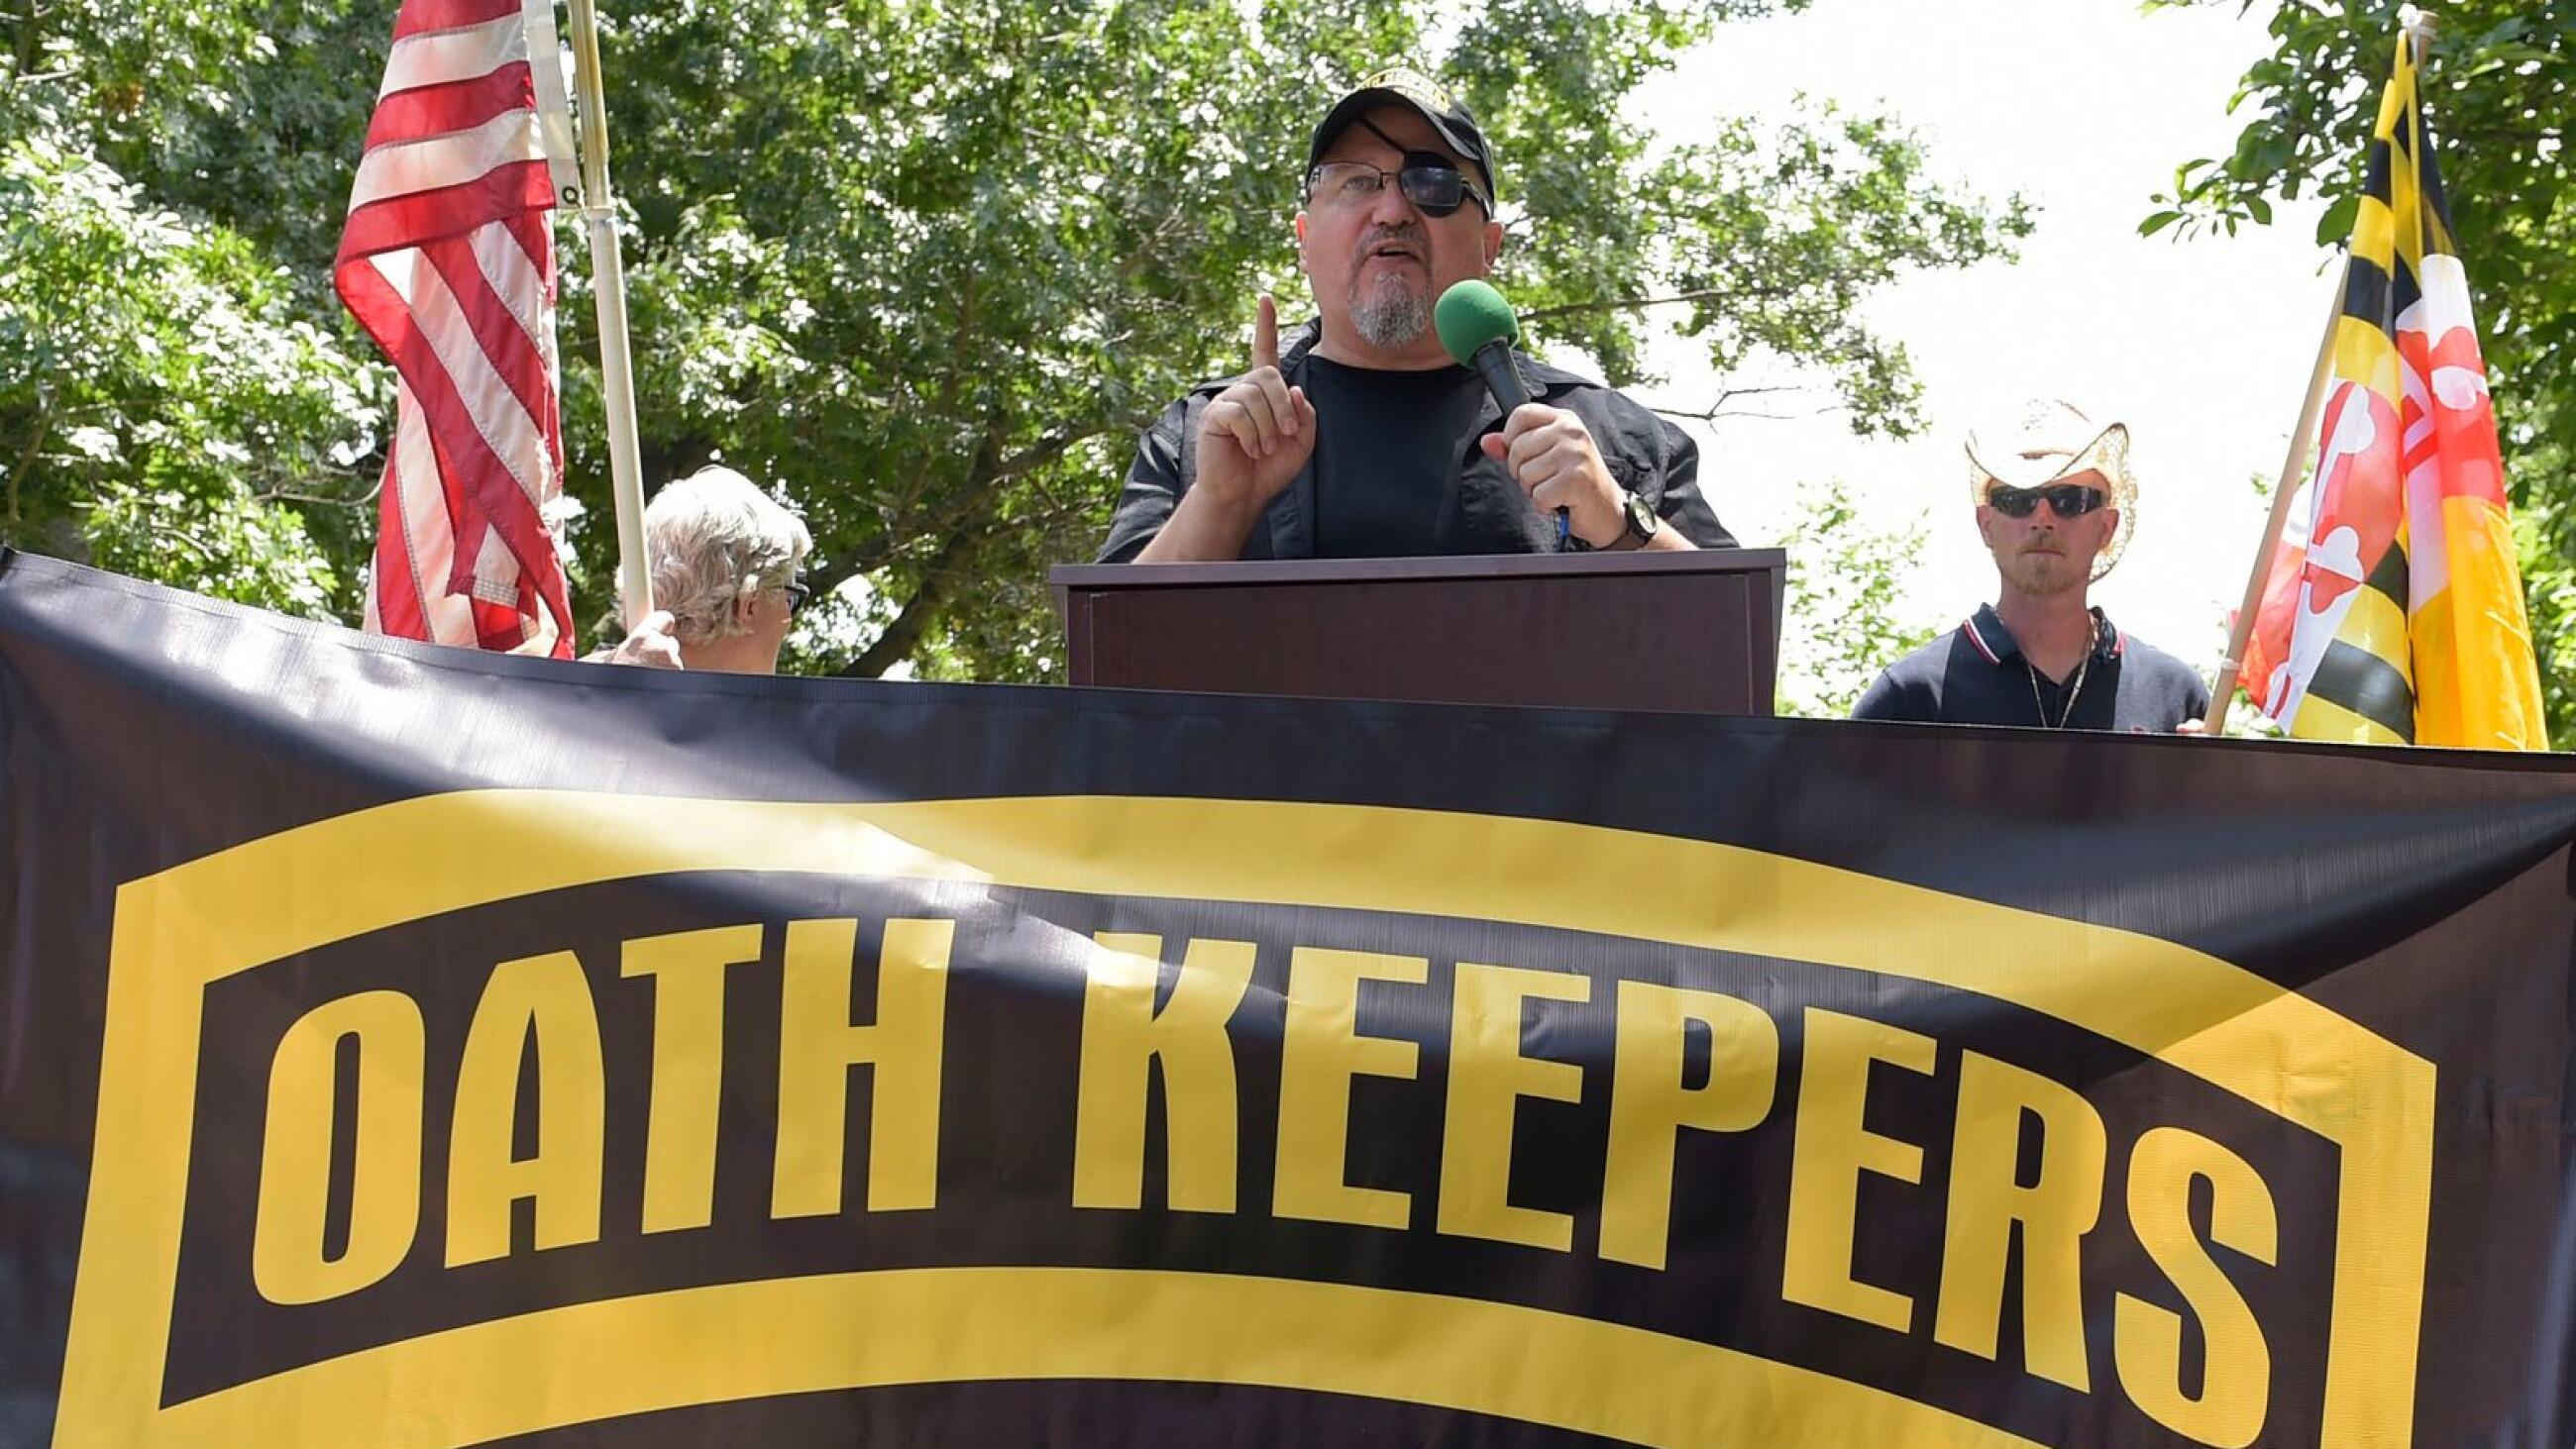 Here's what to know as the Oath Keepers trial opens